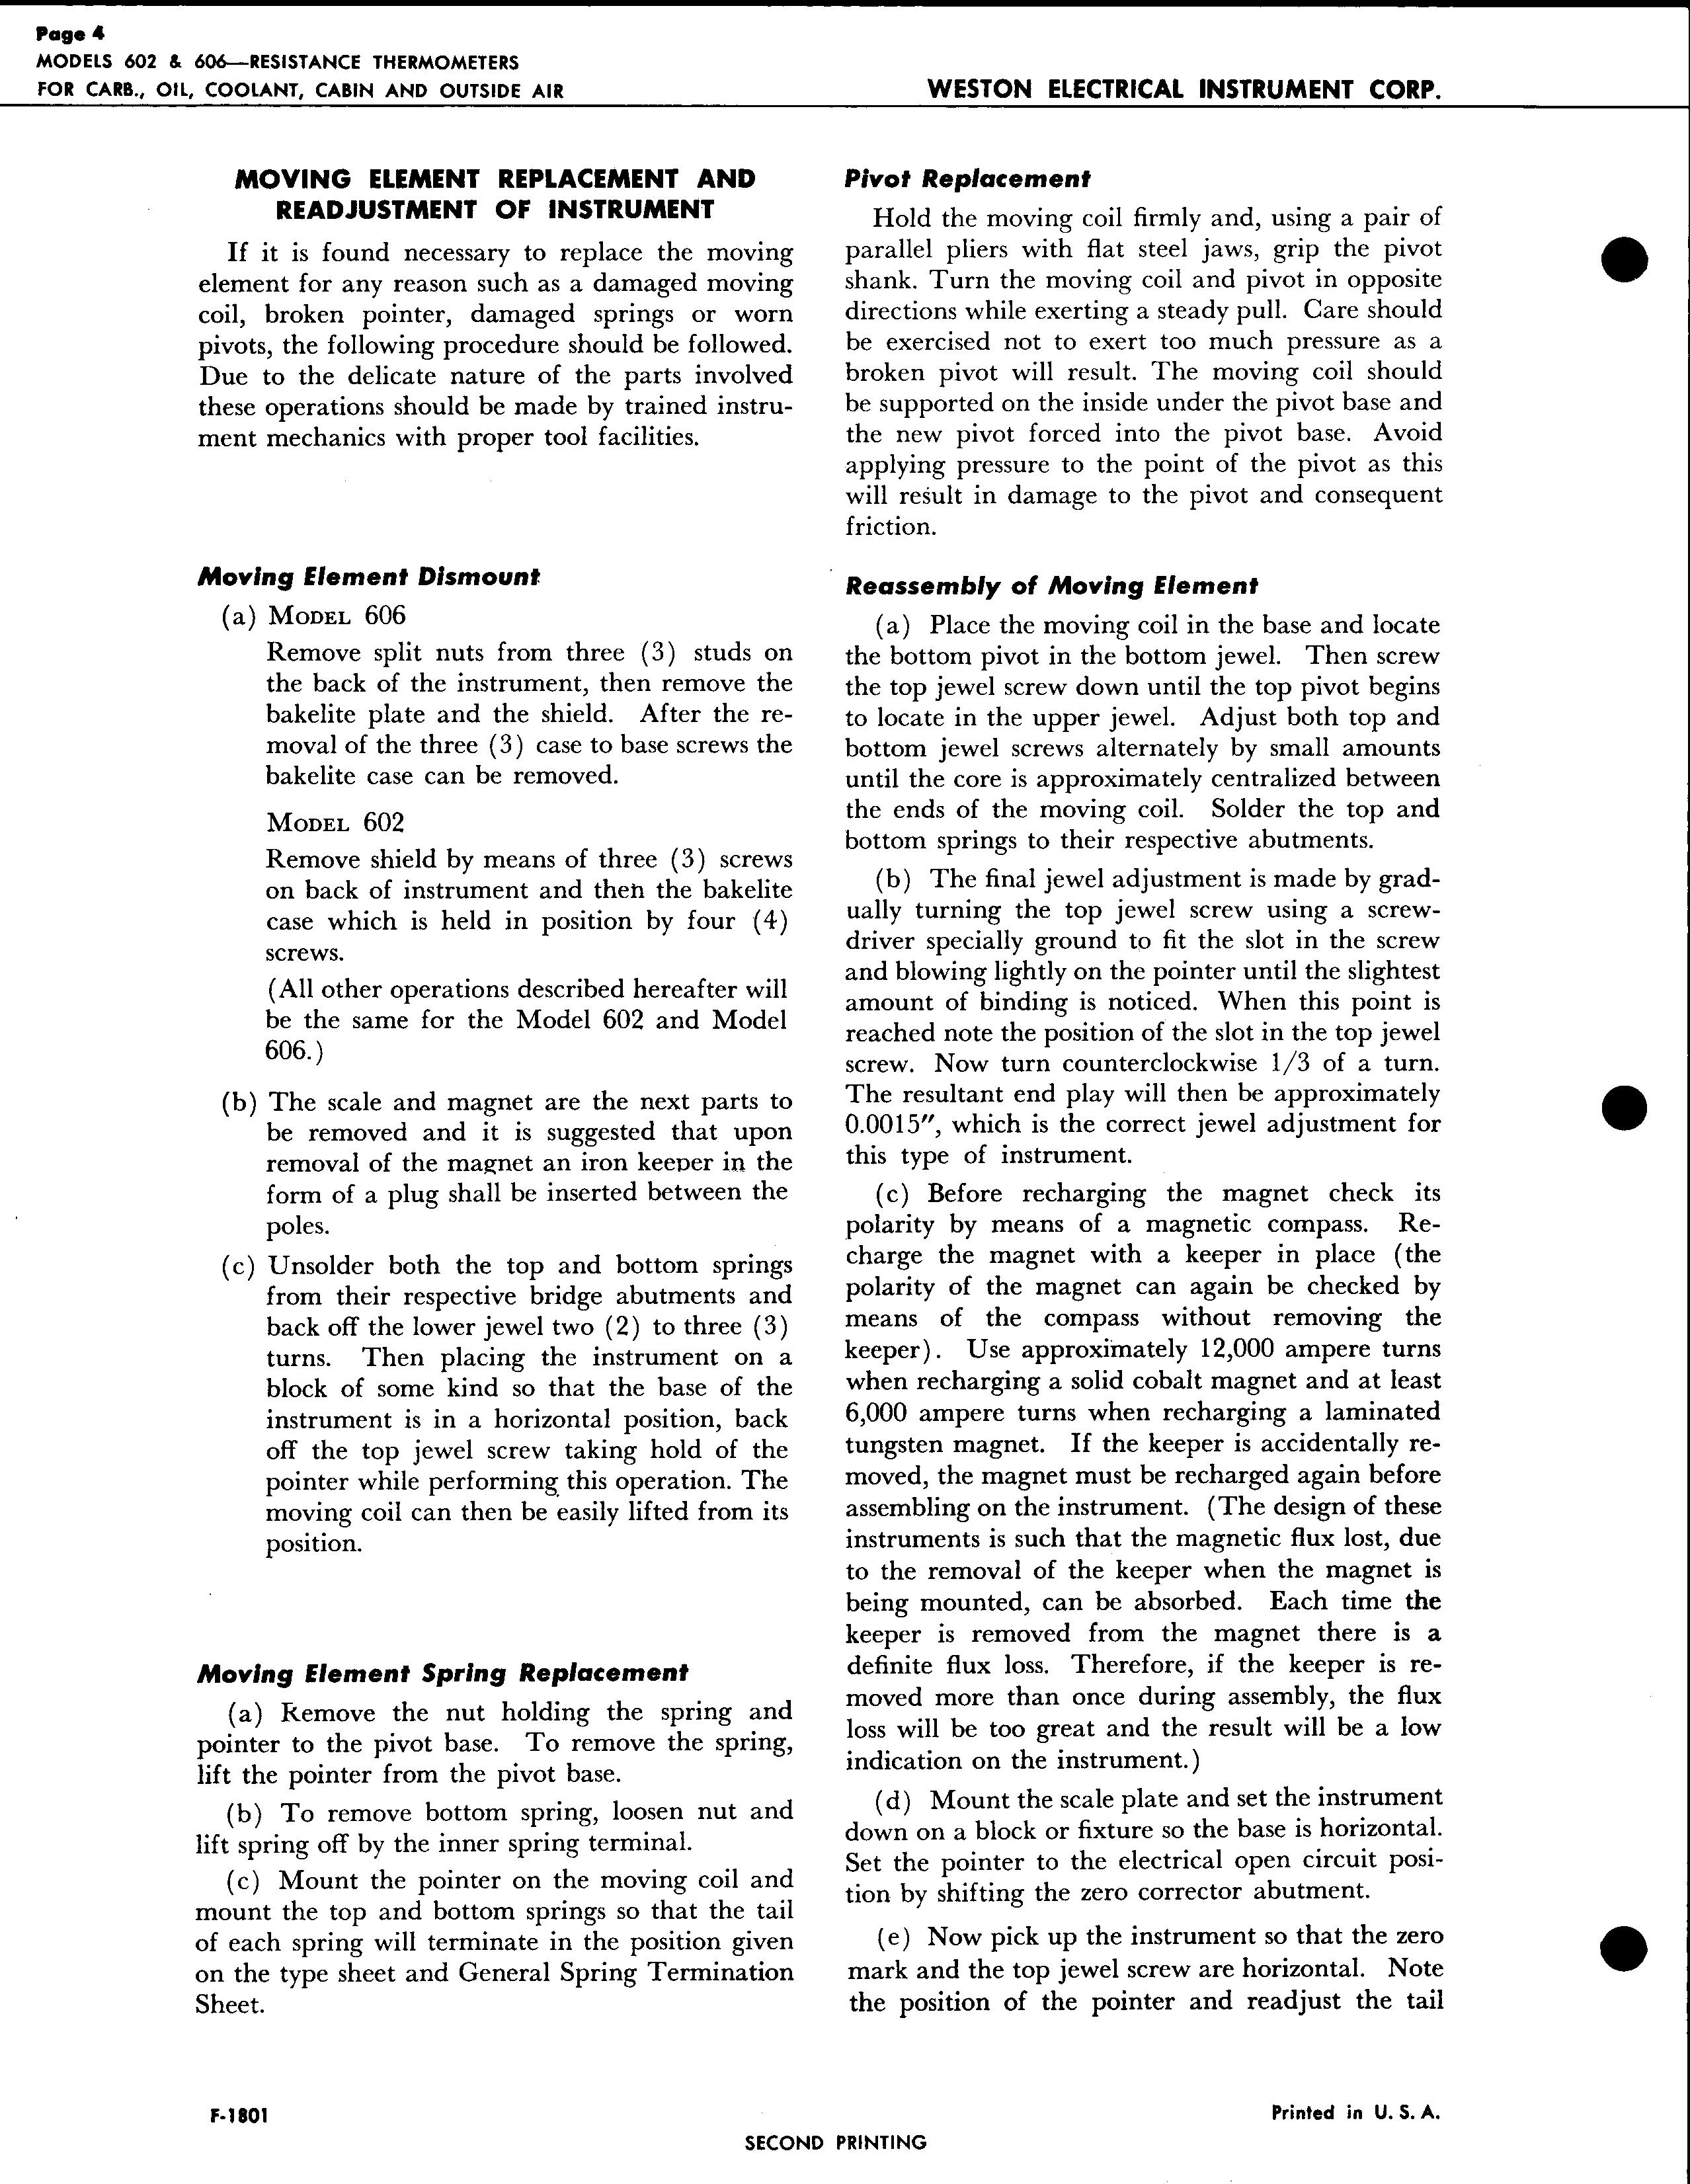 Sample page 4 from AirCorps Library document: Service Instructions for Models 602 & 606 Resistance Thermometers